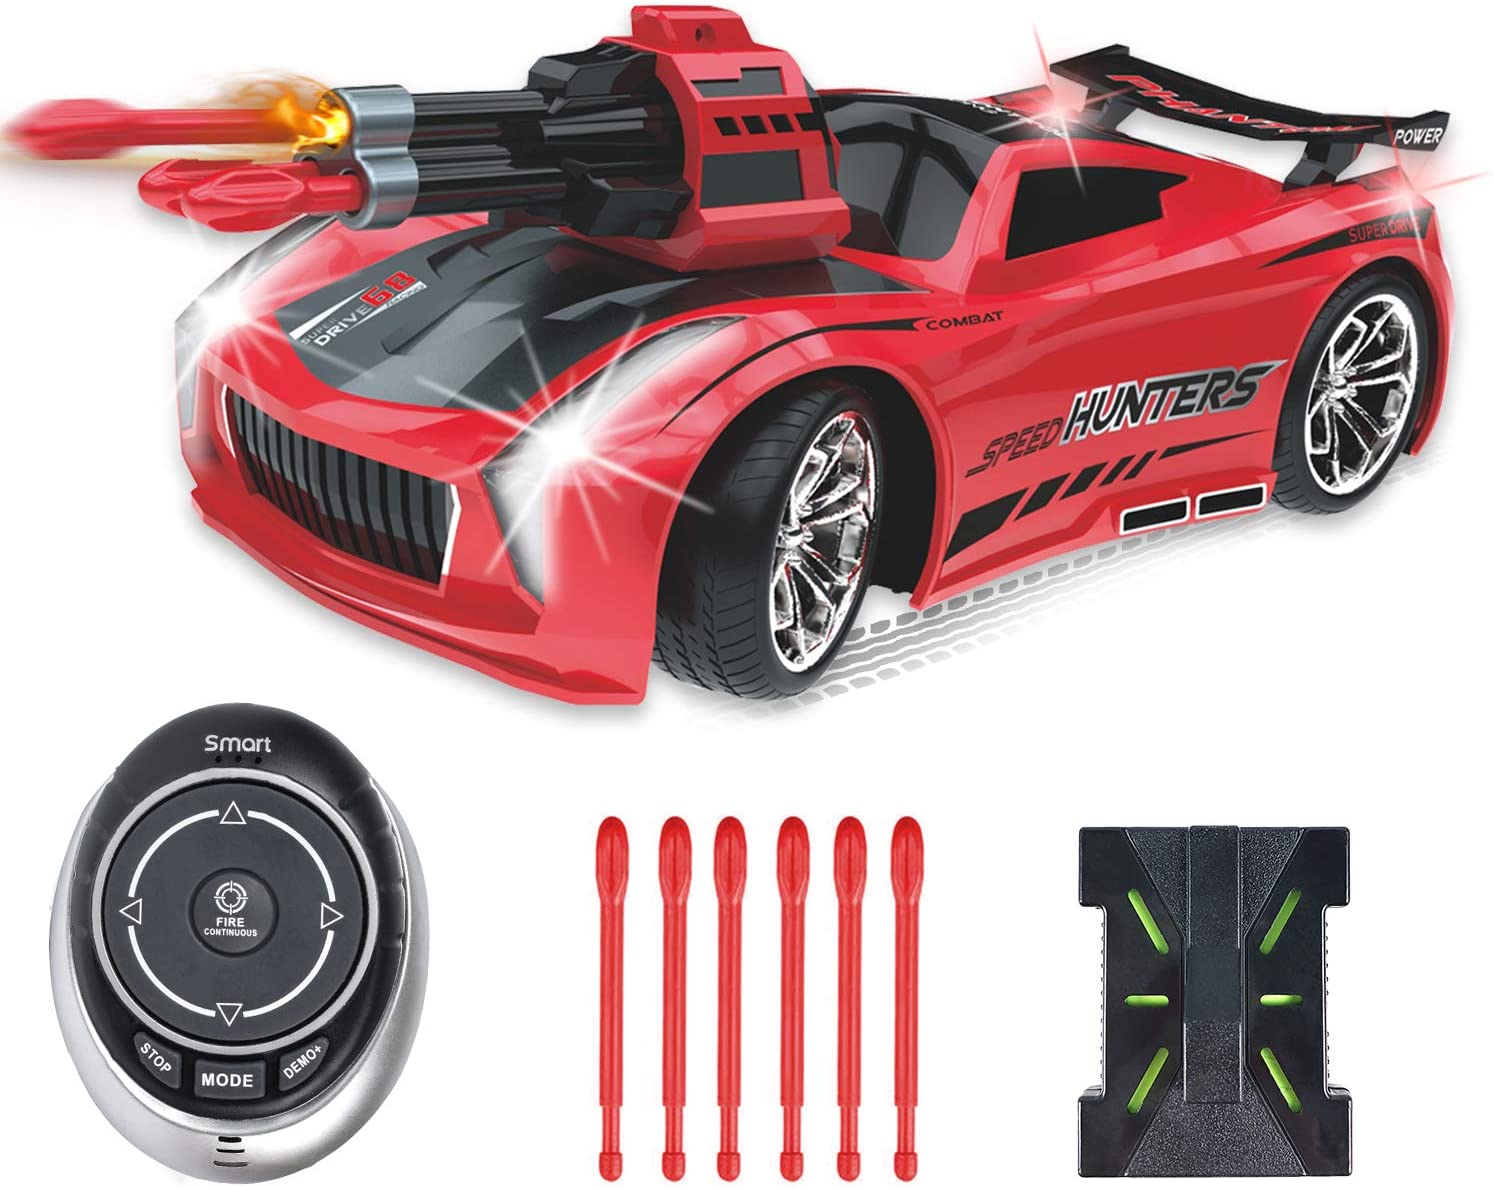 ''Seckton Smart Voice REMOTE CONTROL CARs, Best Birthday Gifts for Boys Girls Age 6 Up, 2.4GHz Fast R